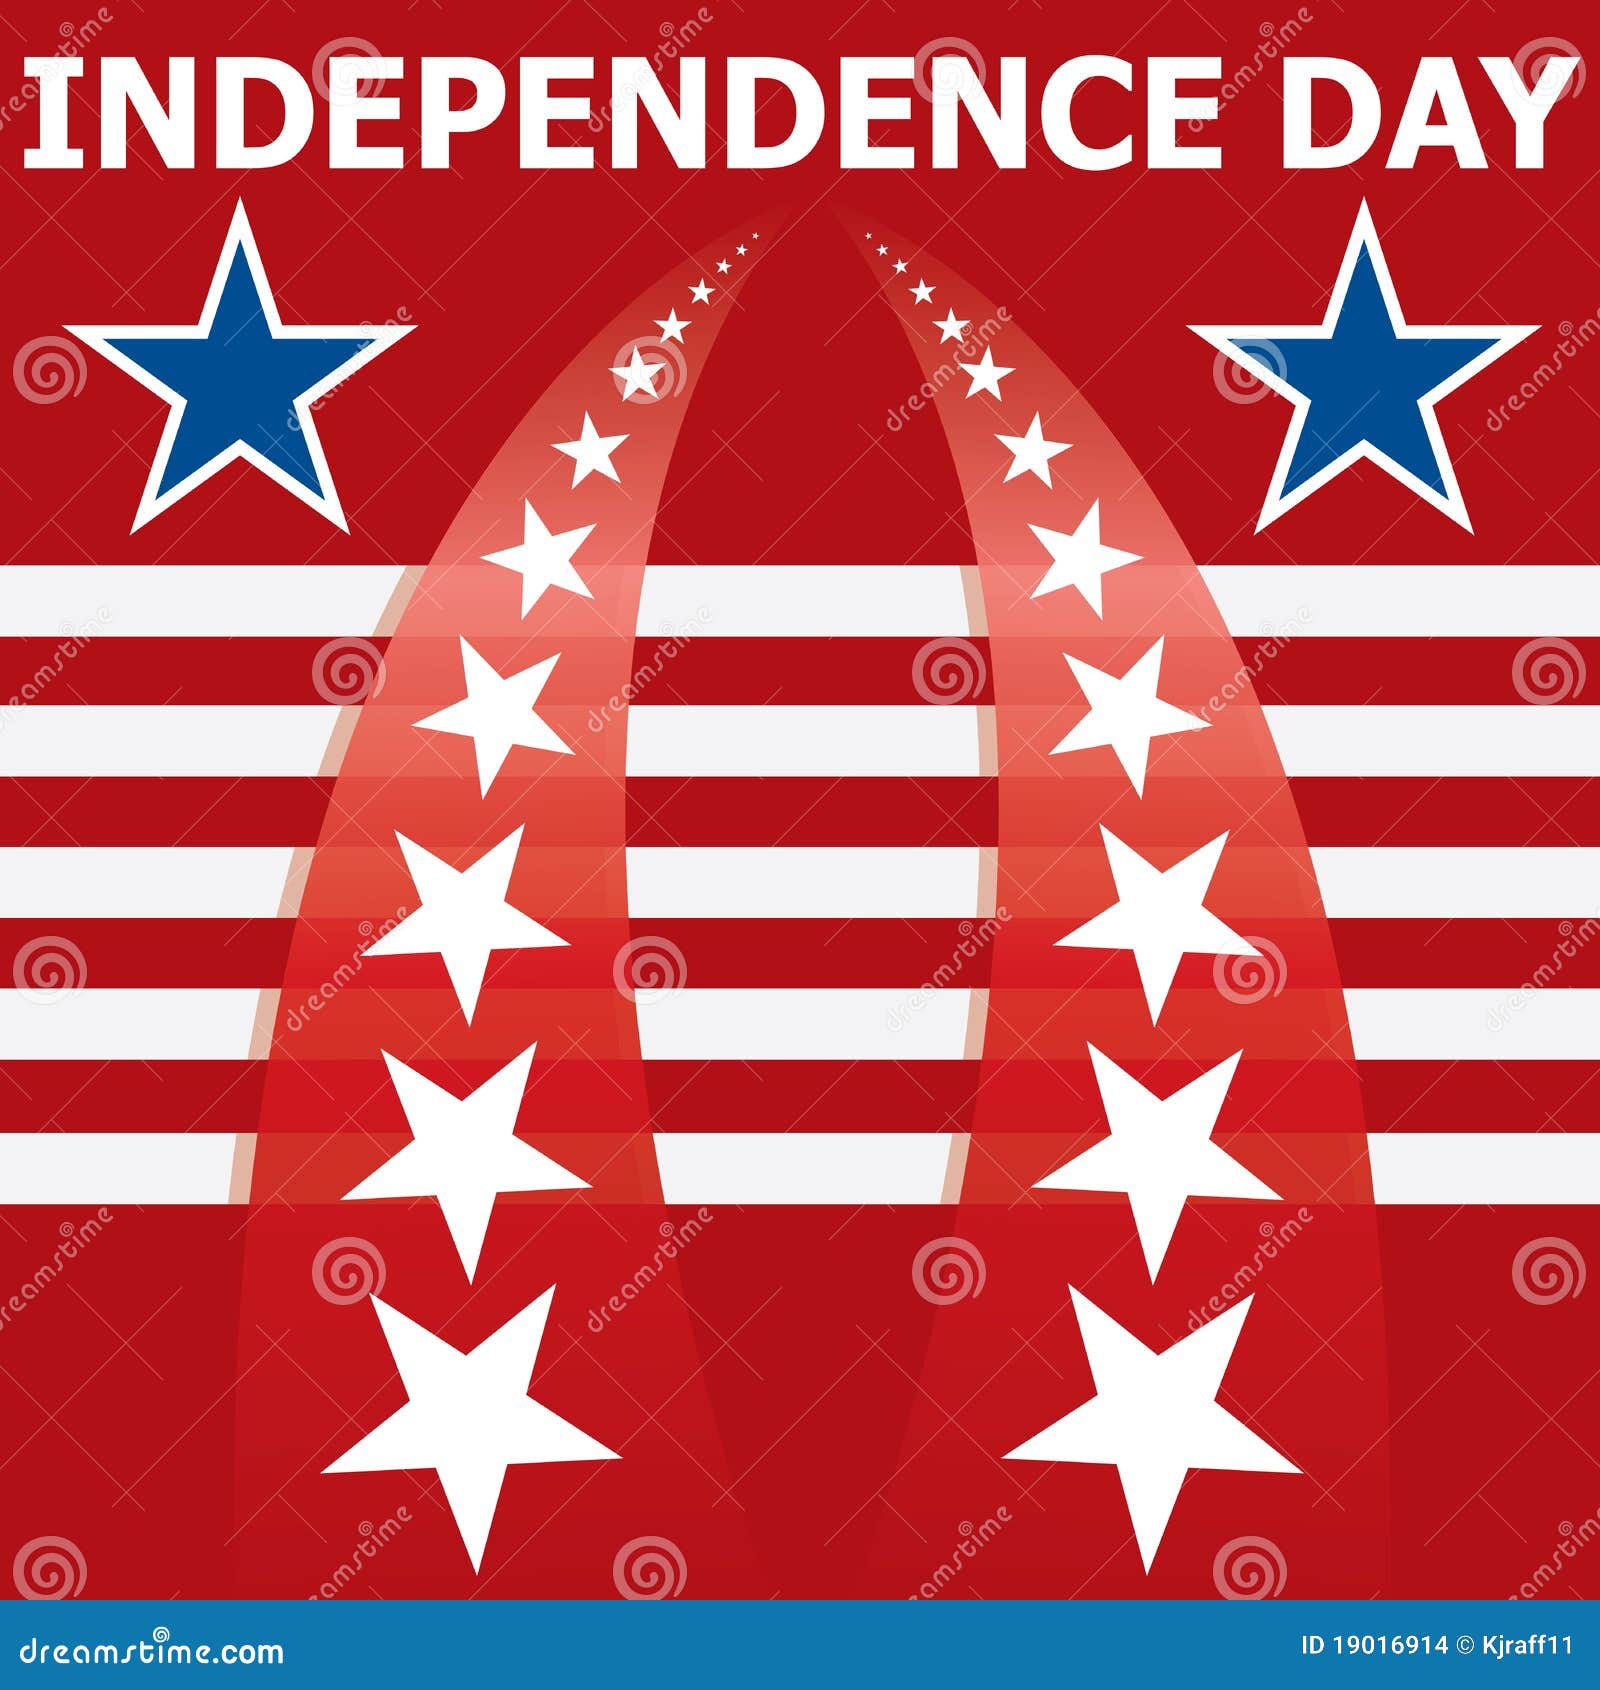 Independence day banner stock vector. Illustration of united - 19016914